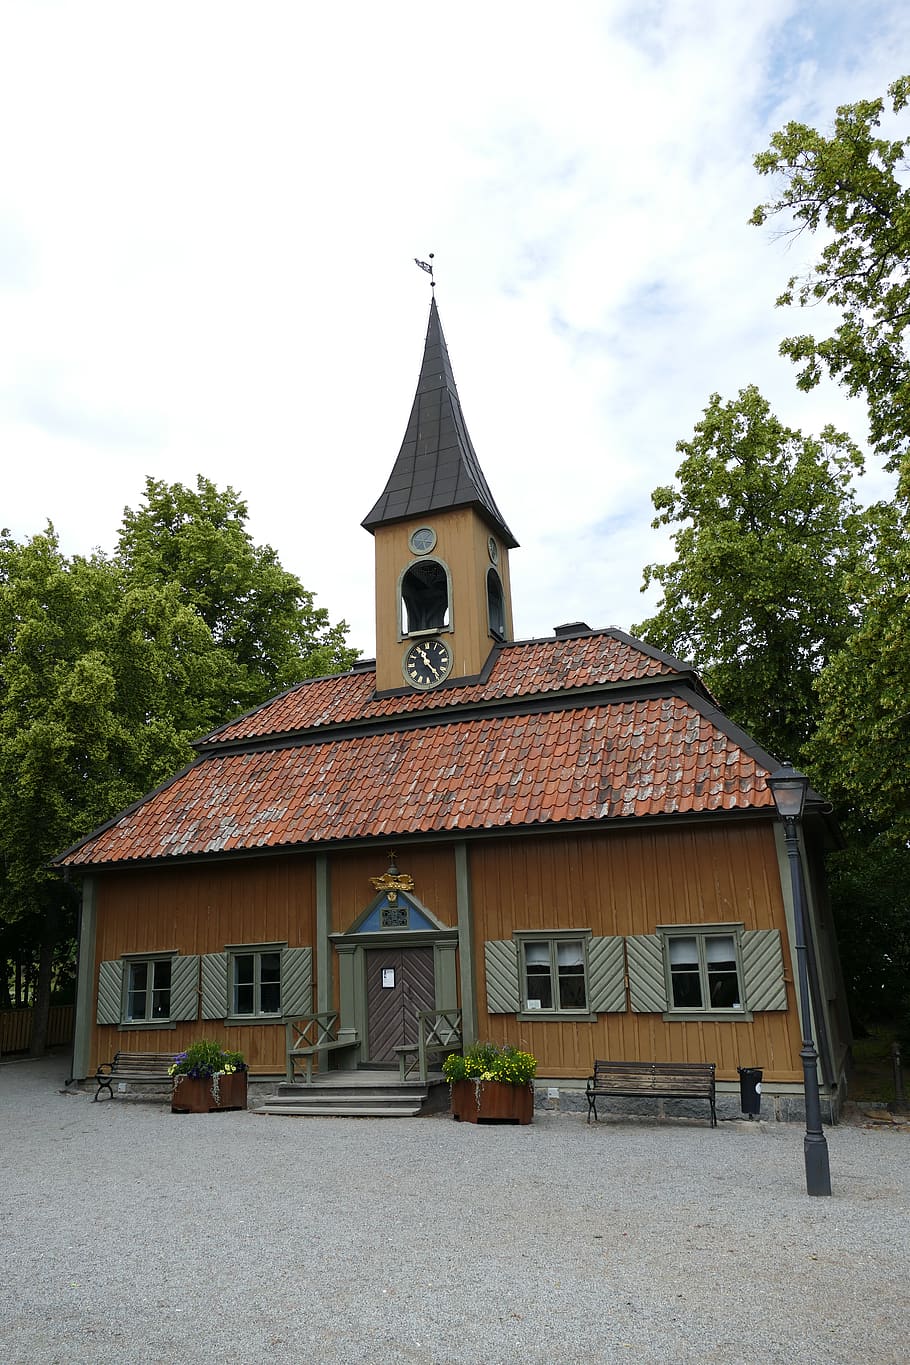 sigtuna, sweden, stockholm, historic center, historically, town hall, wood, crown, architecture, built structure